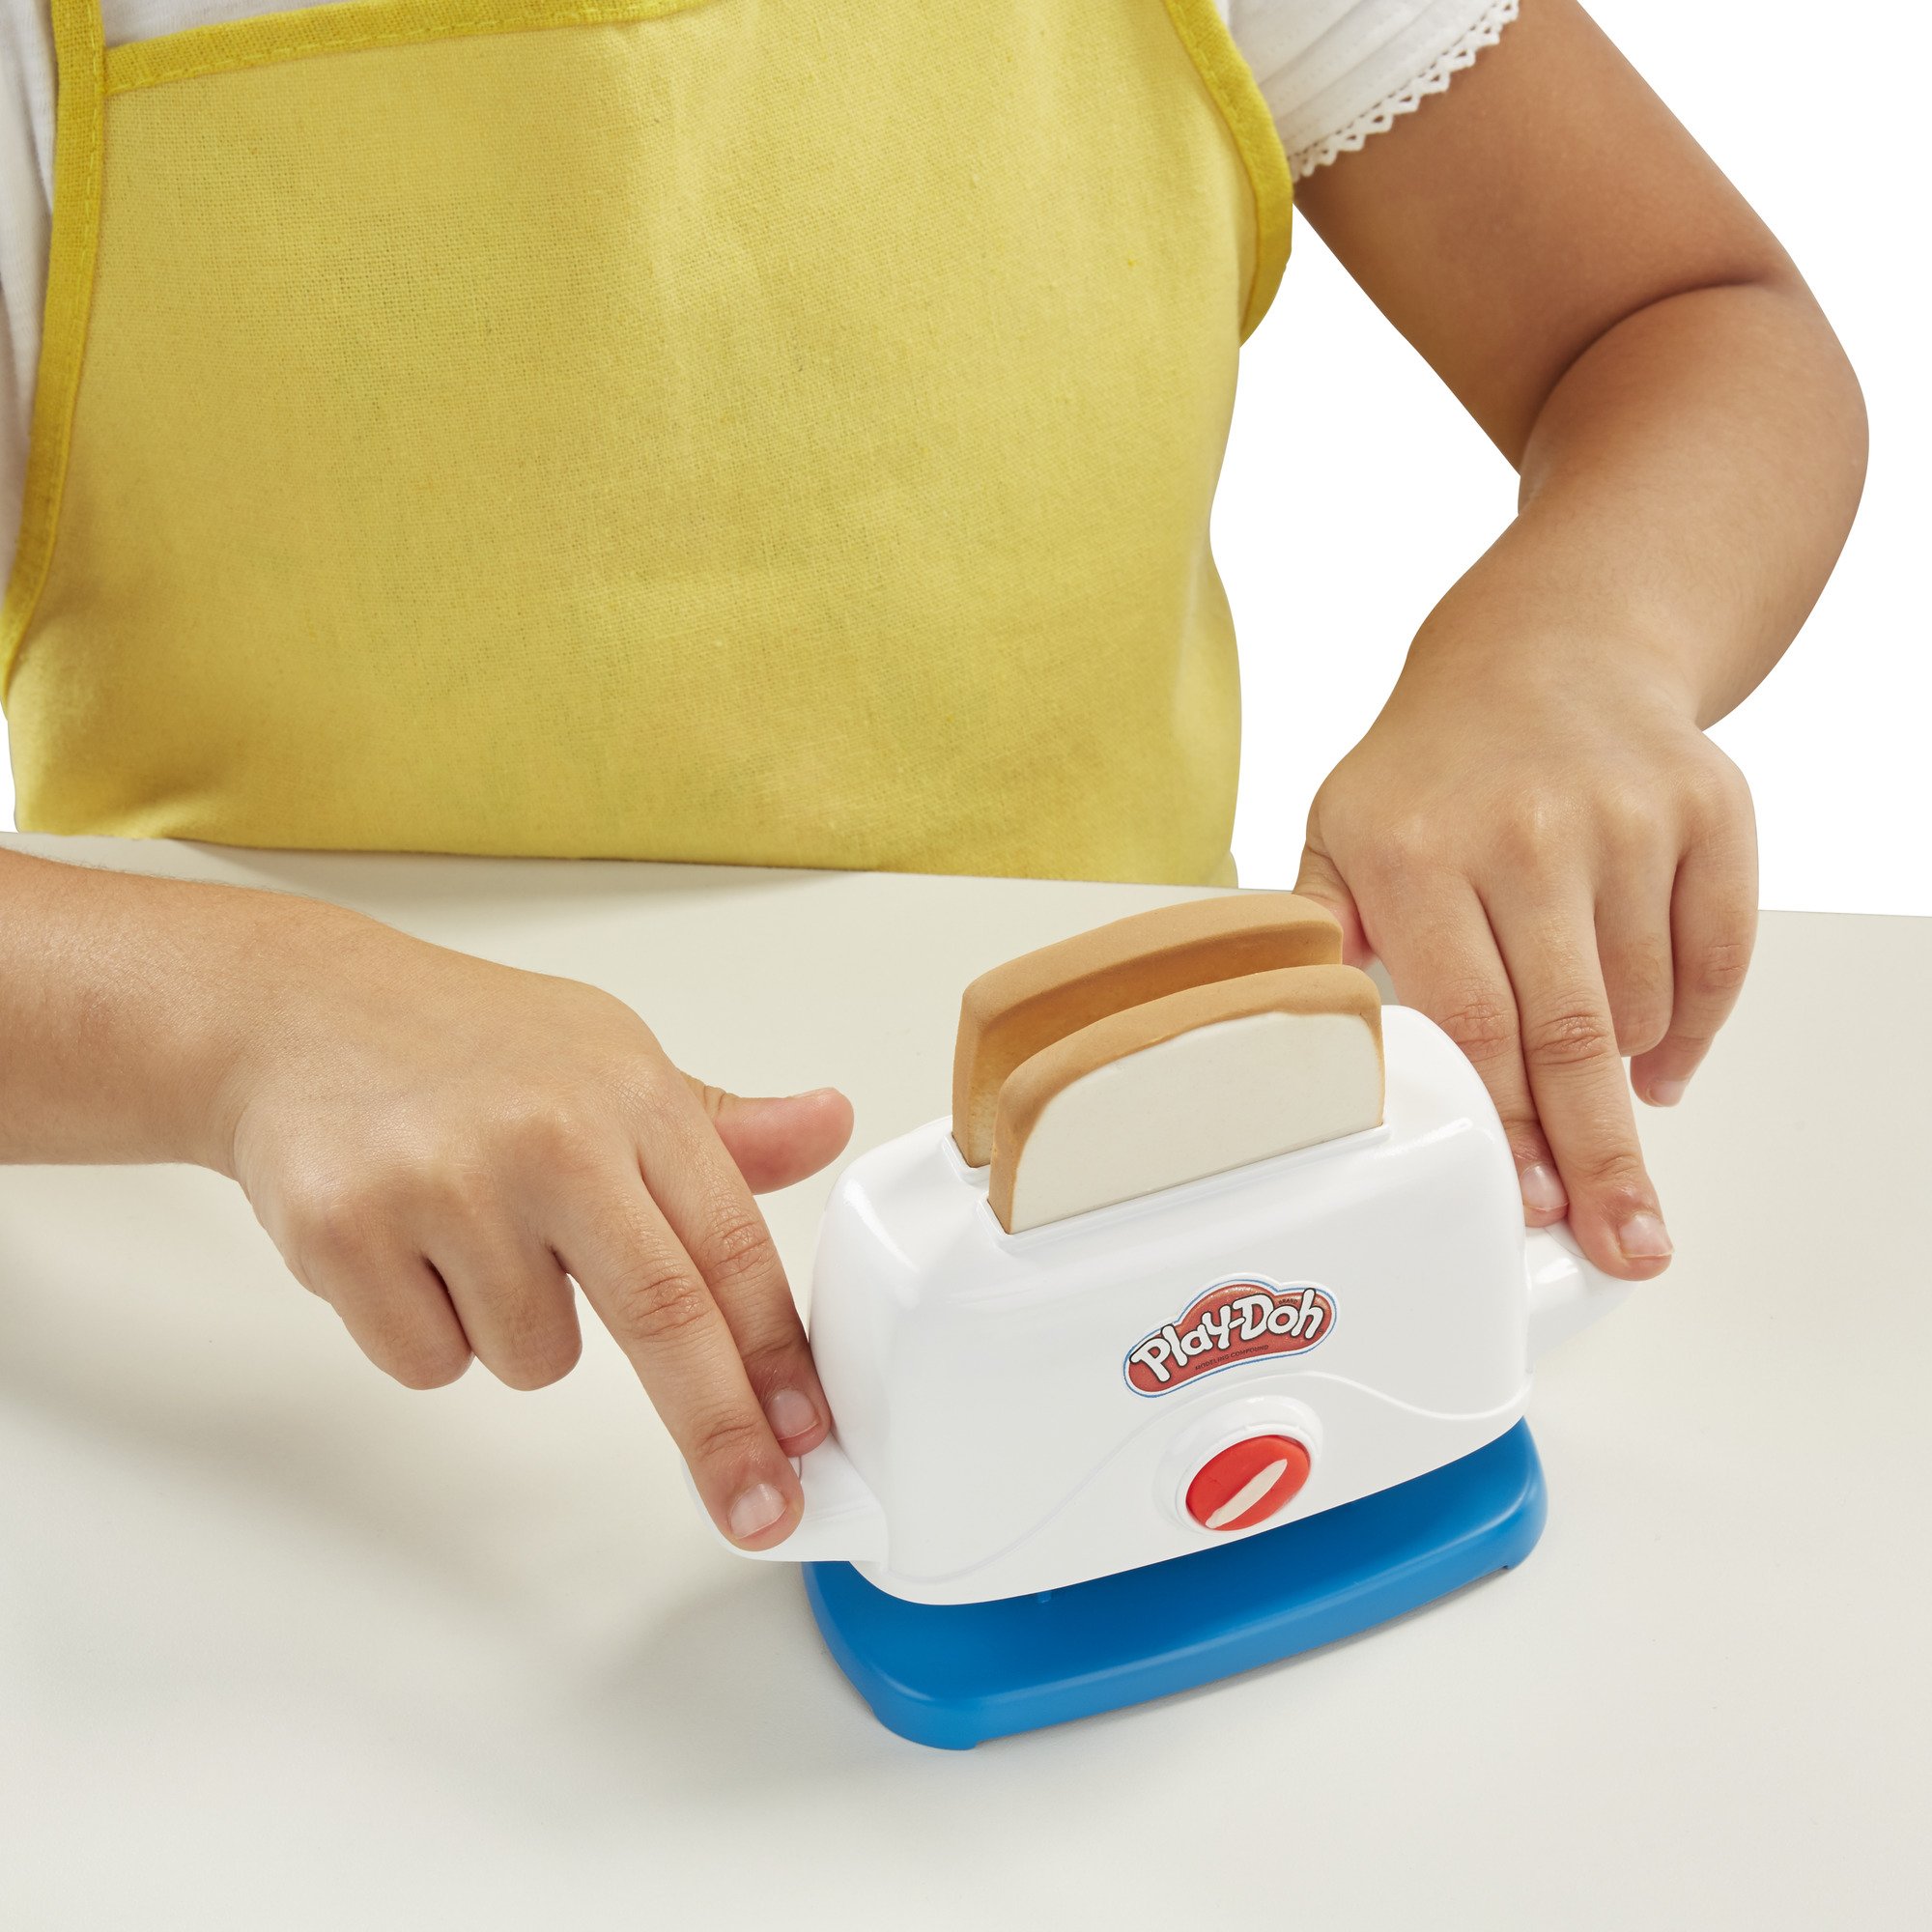 Play-Doh Kitchen Creations Toaster Creations Play Set, 6 Cans (10 oz) - image 5 of 6